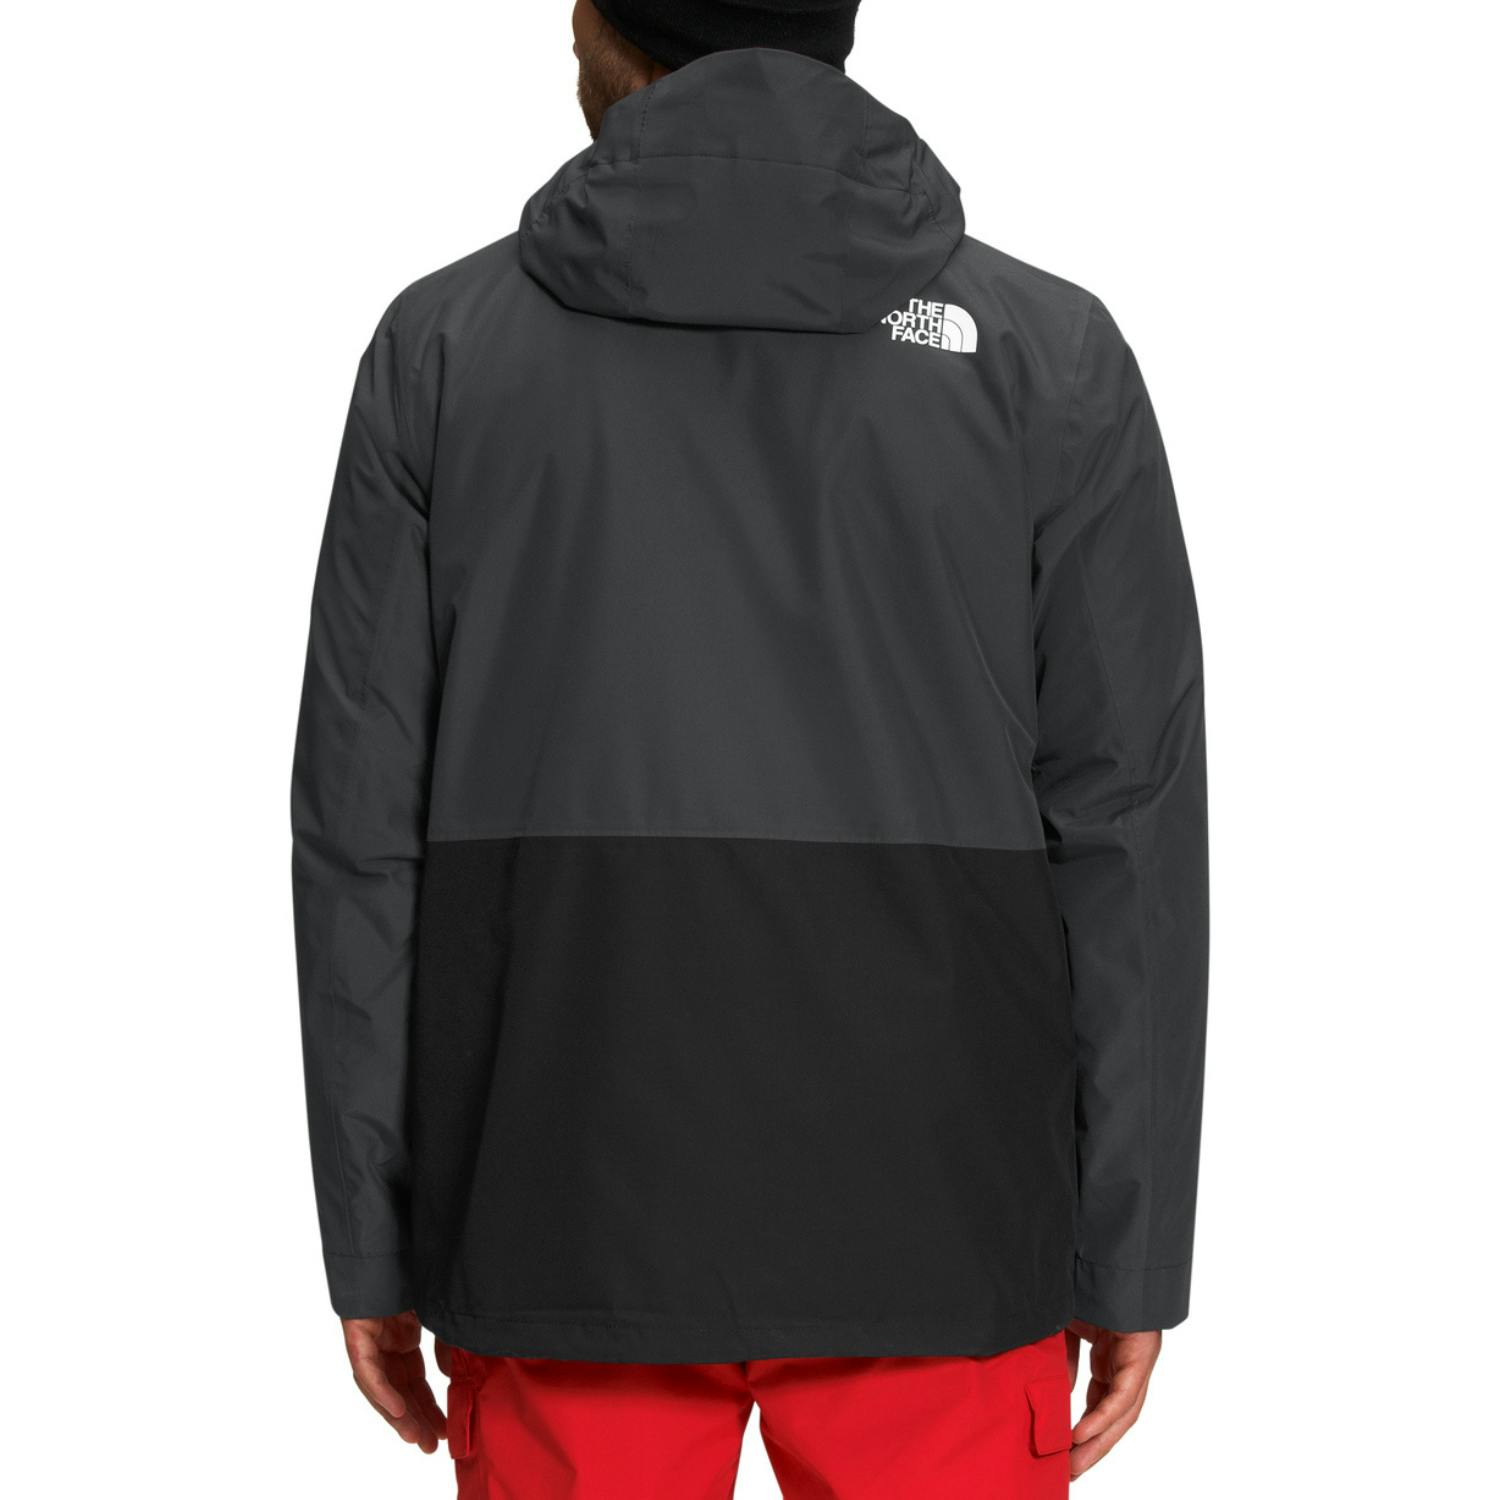 The North Face Clement Triclimate Jacket